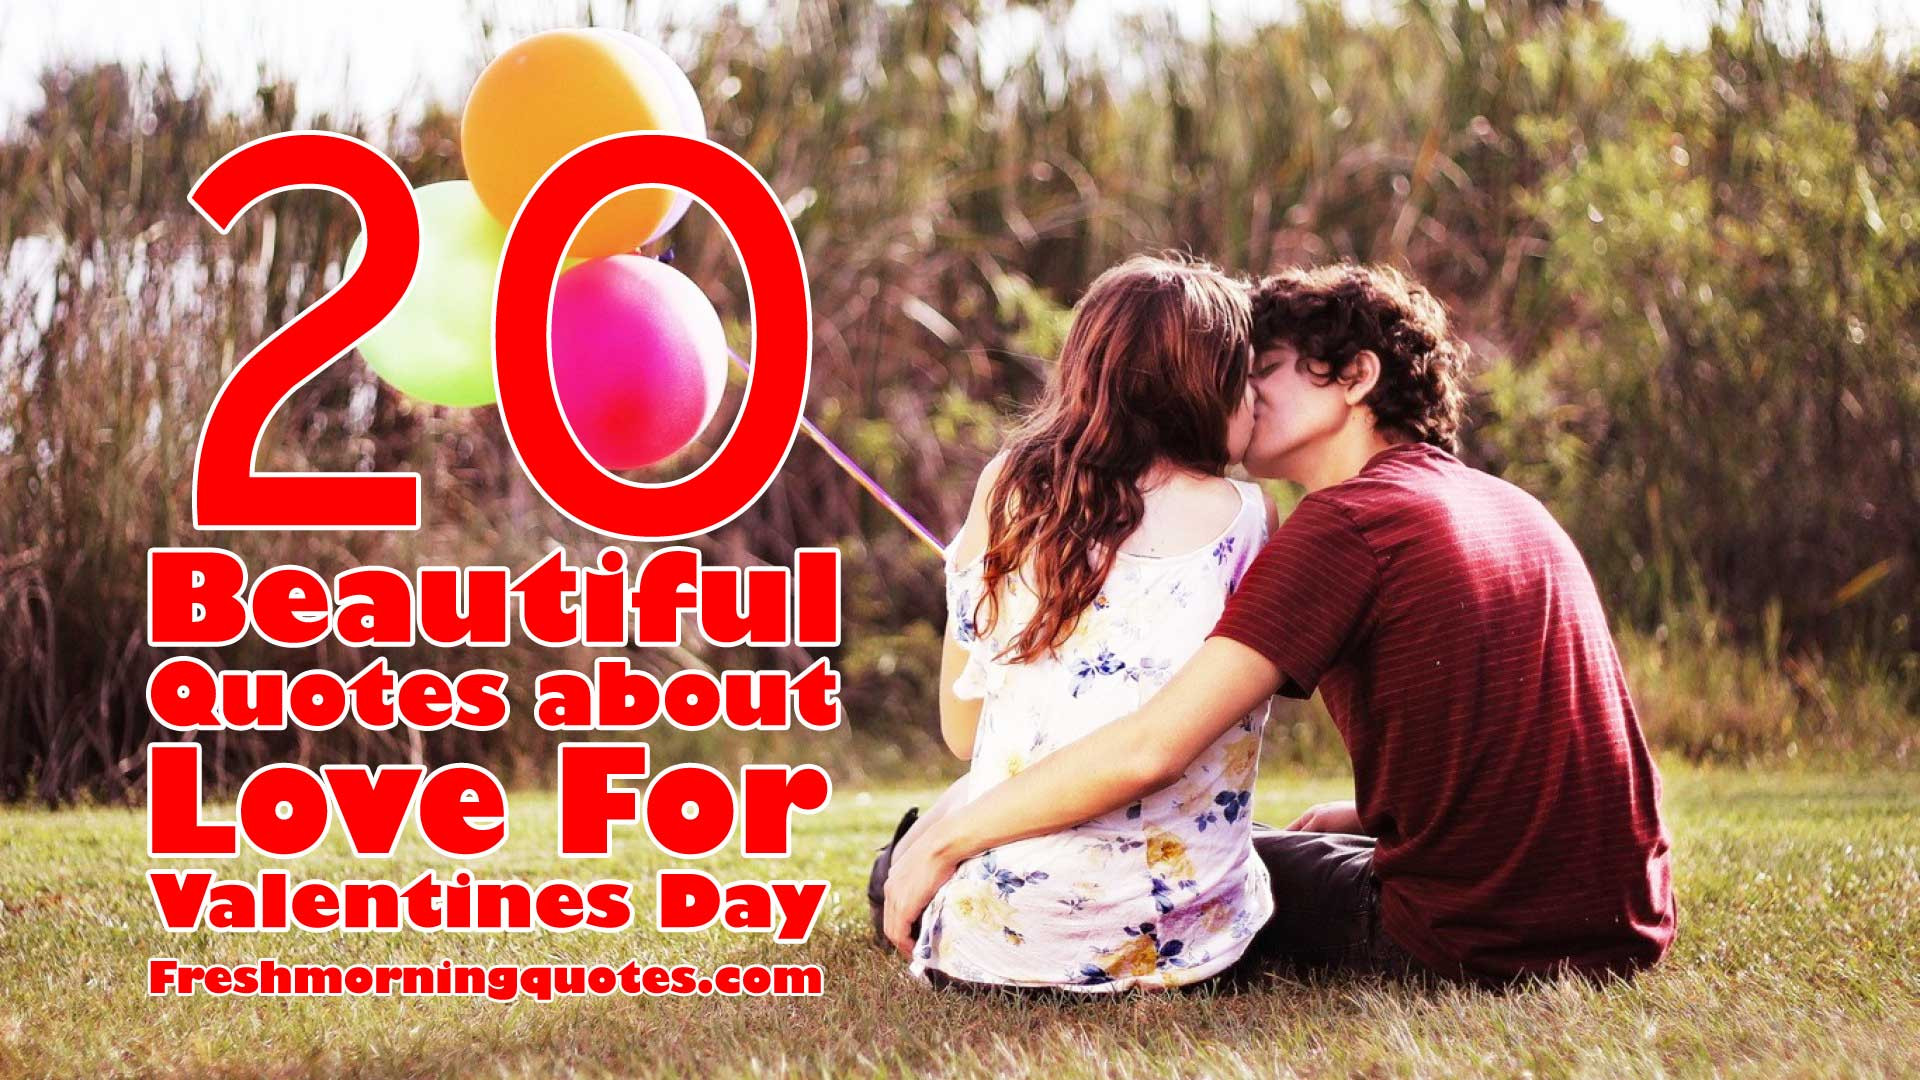 Valentines Day Quotes
 20 Beautiful Quotes about Love for Valentines Day